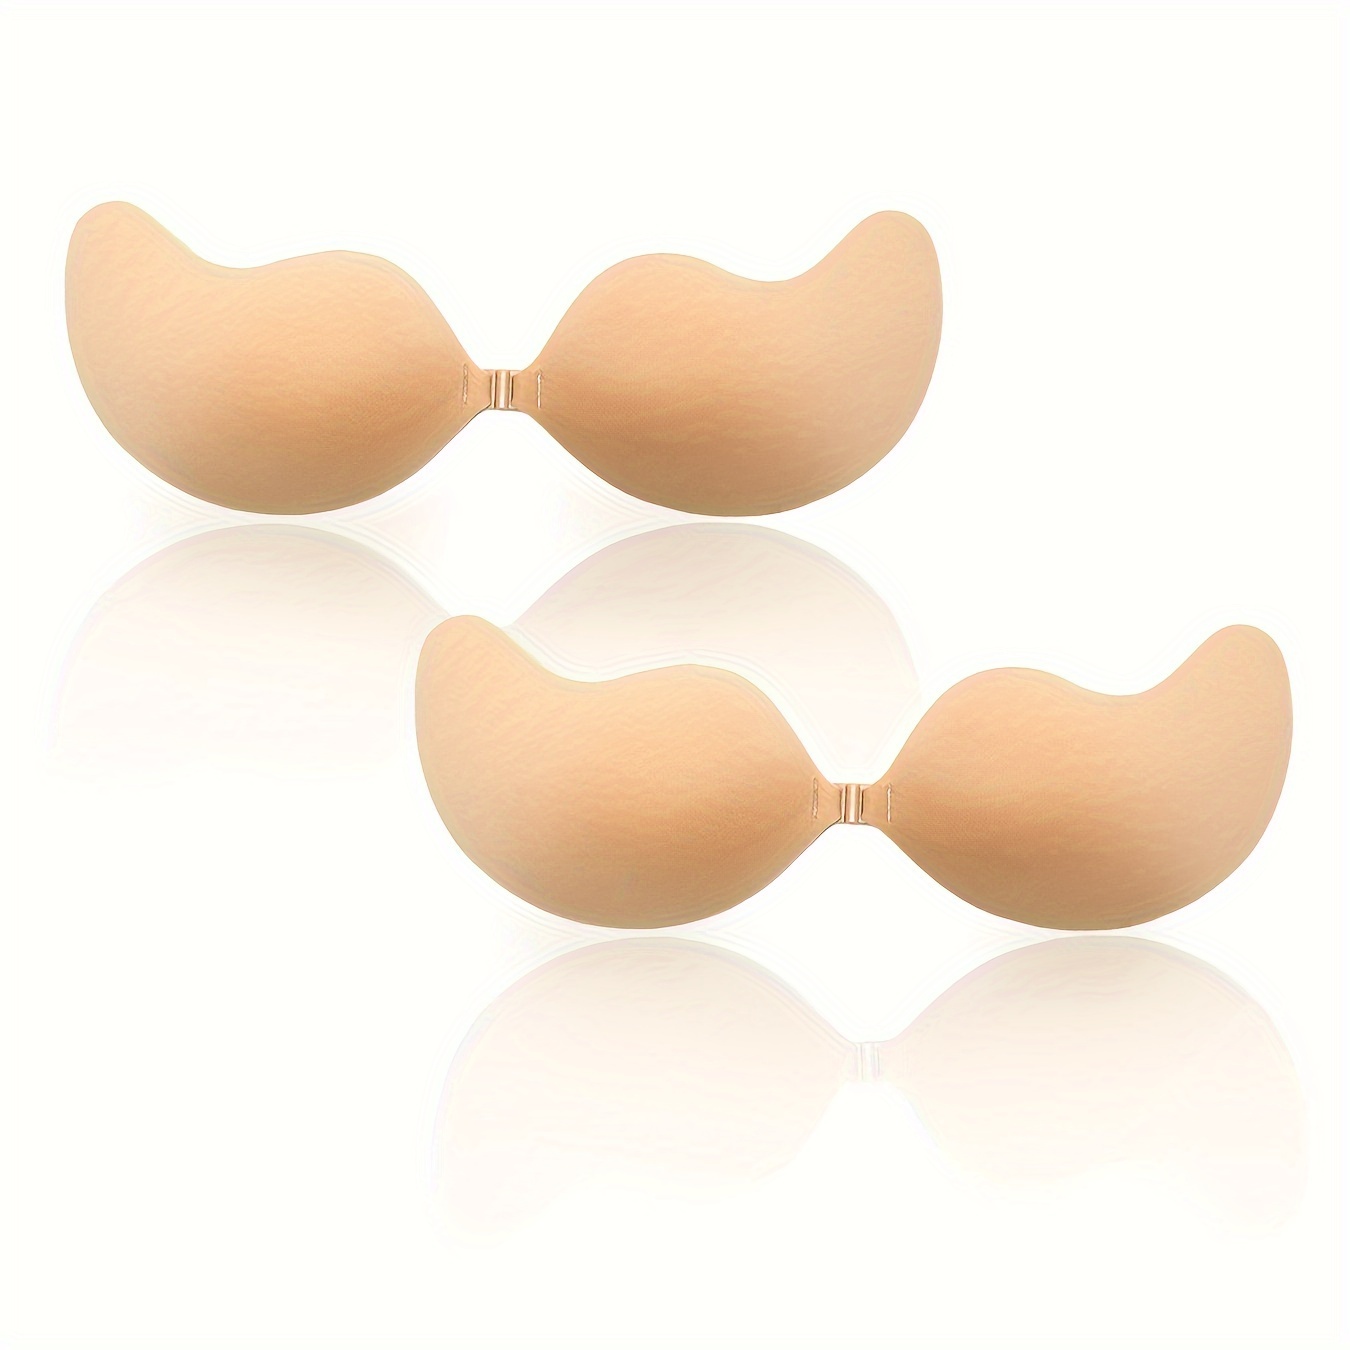 Lifting Nipple Covers, Invisible Self-Adhesive Push Up Nipple Pasties,  Women's Lingerie & Underwear Accessories